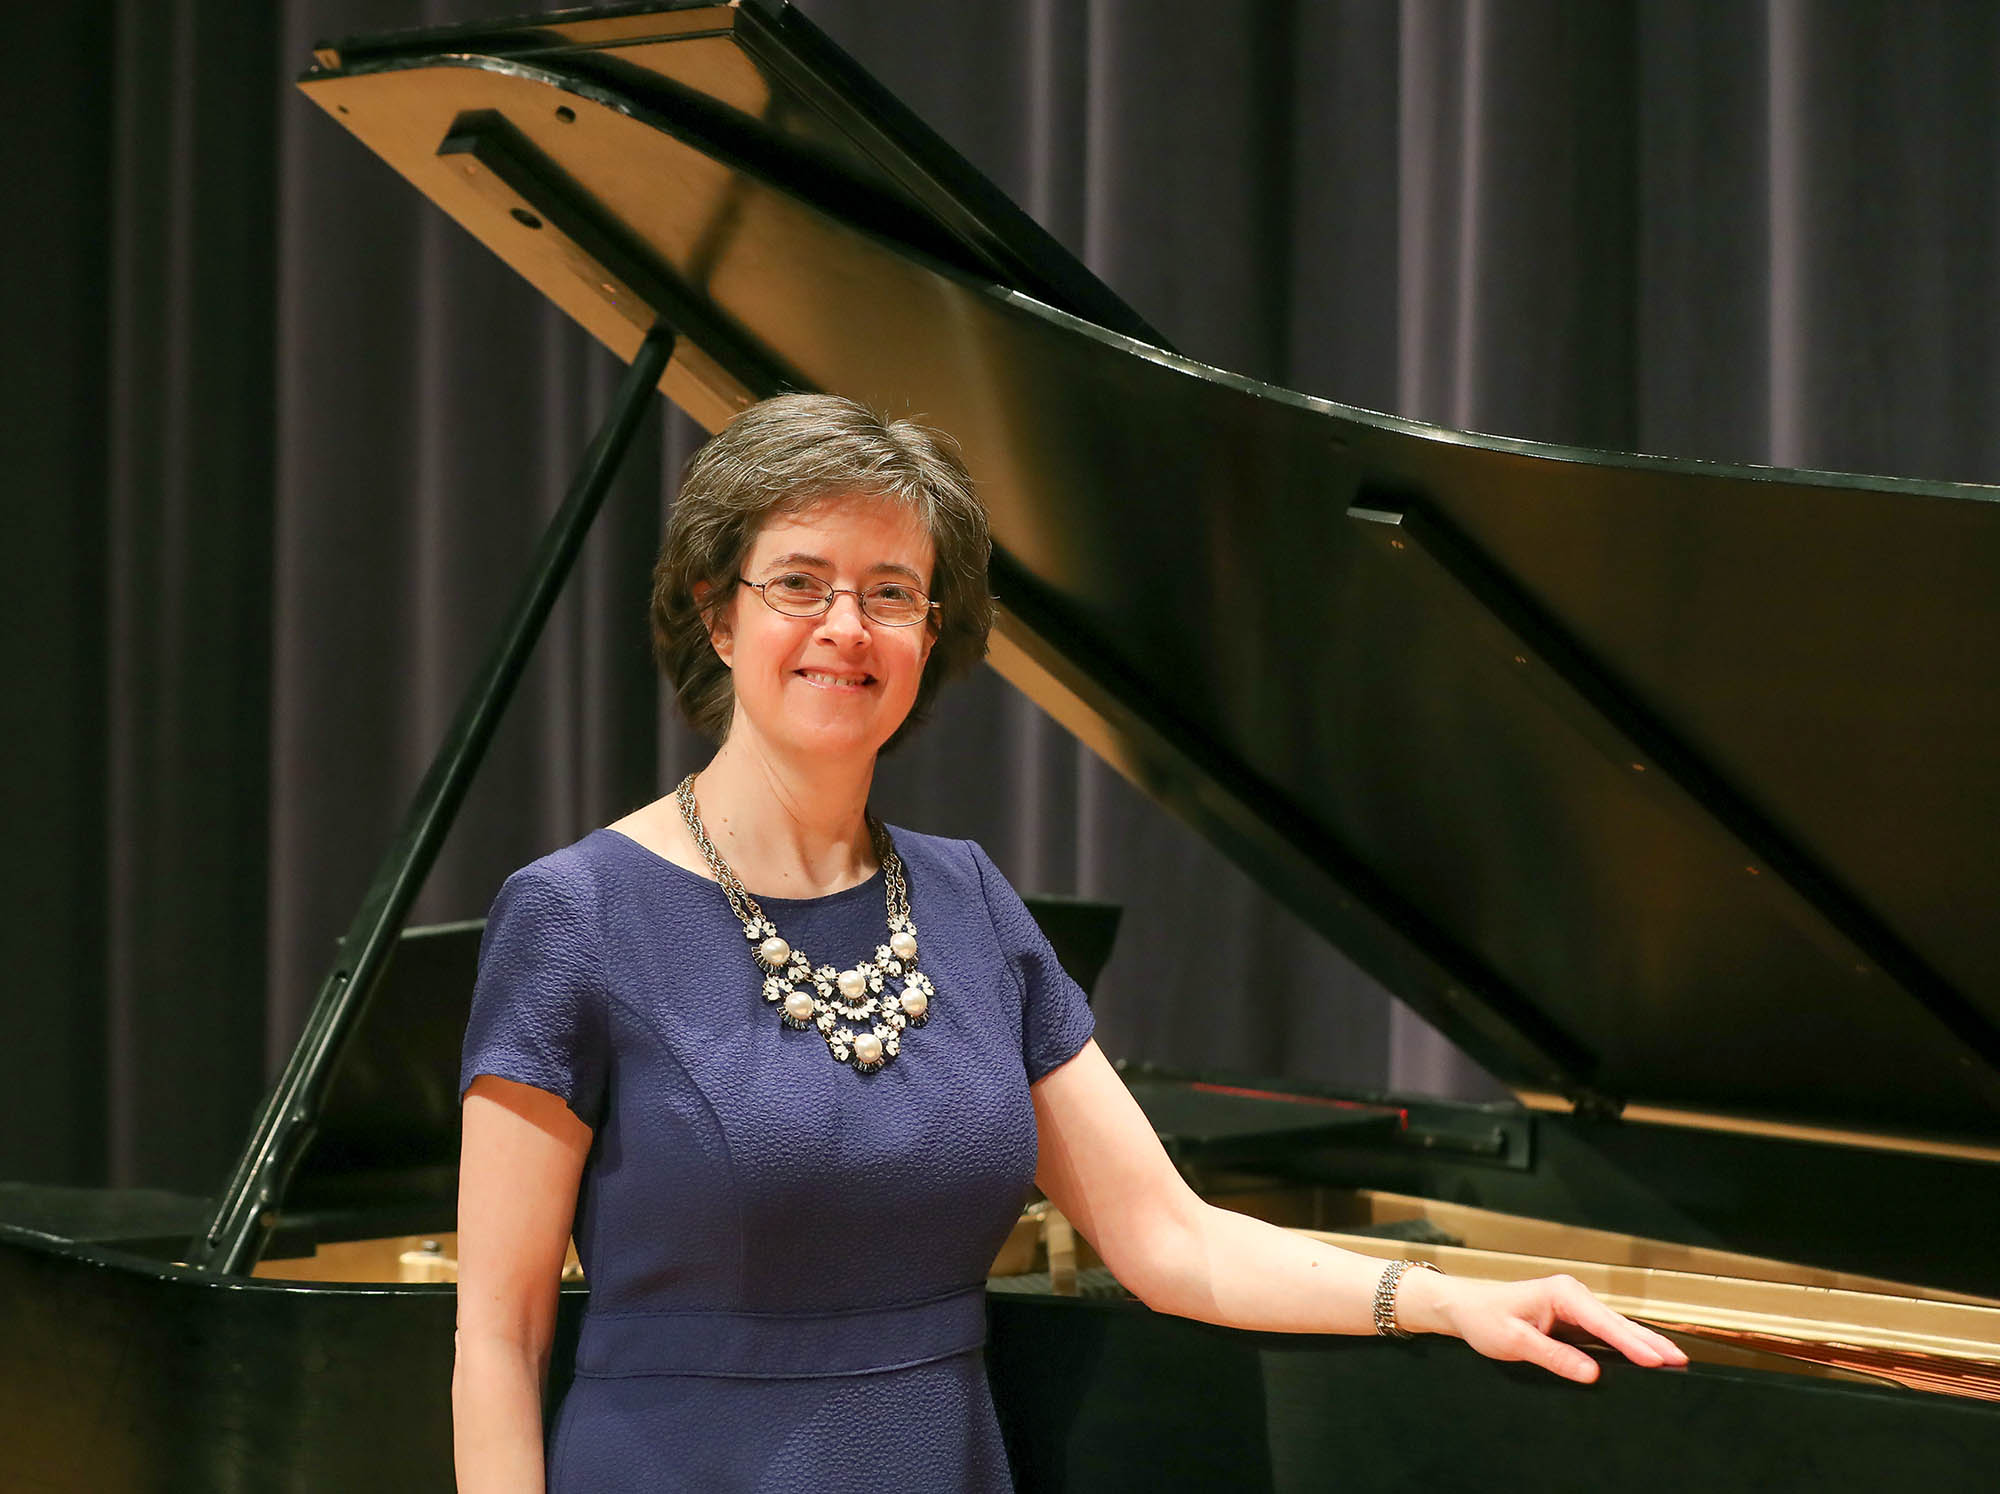 Associate professor of teacher education Dawn Mollenkopf will perform 3 p.m. Sunday in UNK’s Fine Arts Recital Hall. It’s the first full voice recital for Mollenkopf, who has severe-to-profound hearing loss. (Photos by Corbey R. Dorsey, UNK Communications)